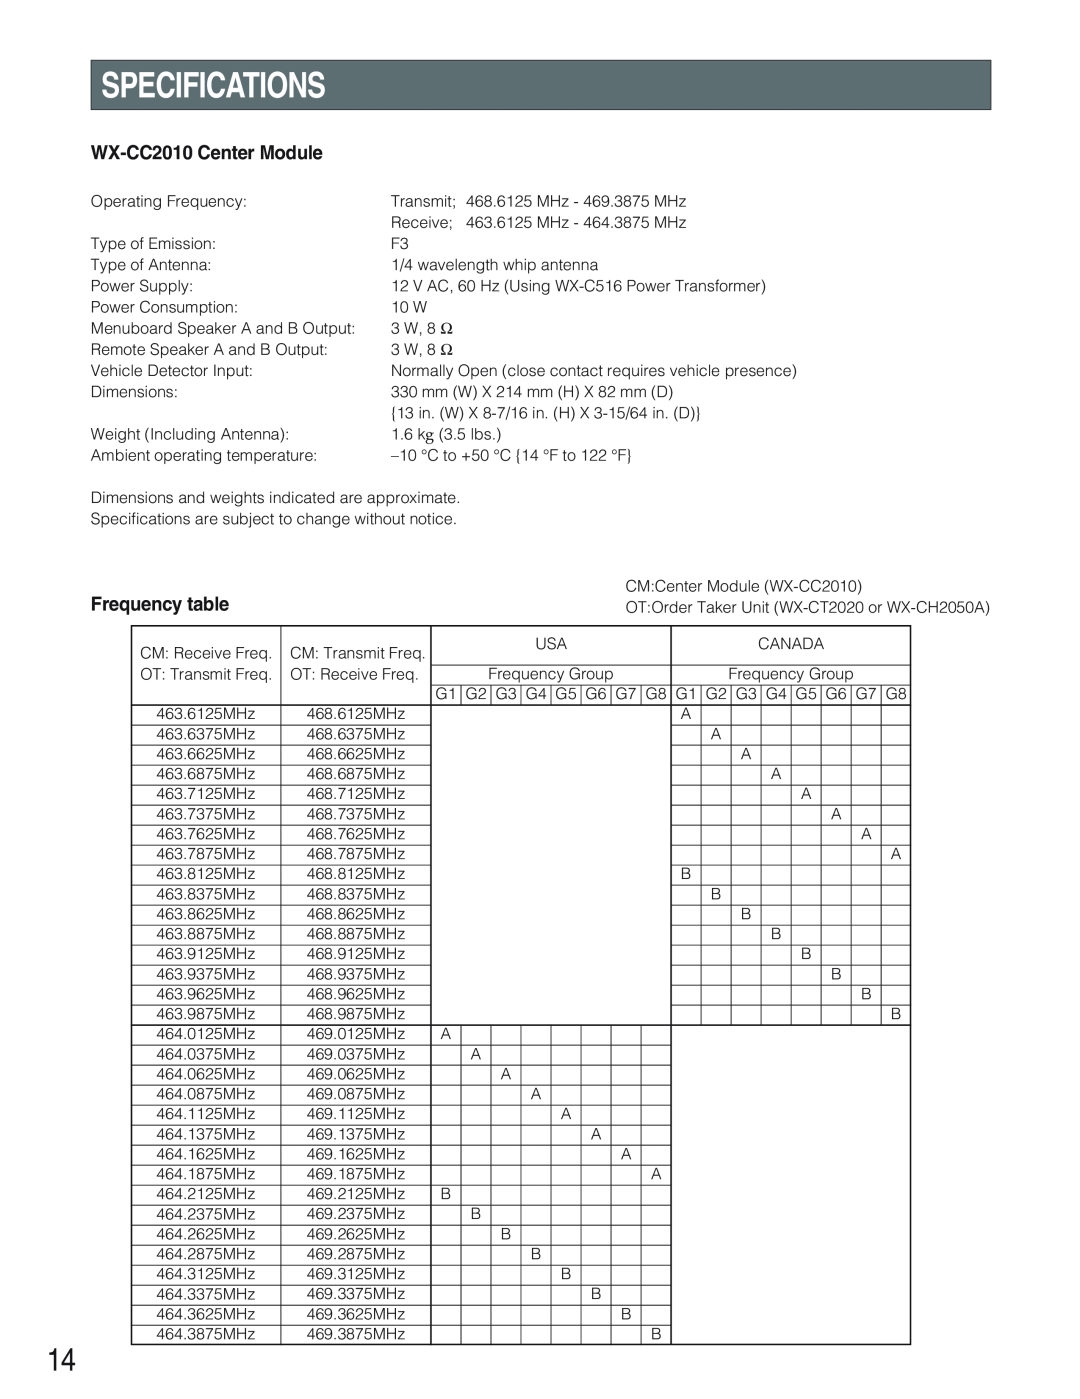 Panasonic operating instructions Specifications, WX-CC2010Center Module, Frequency table 